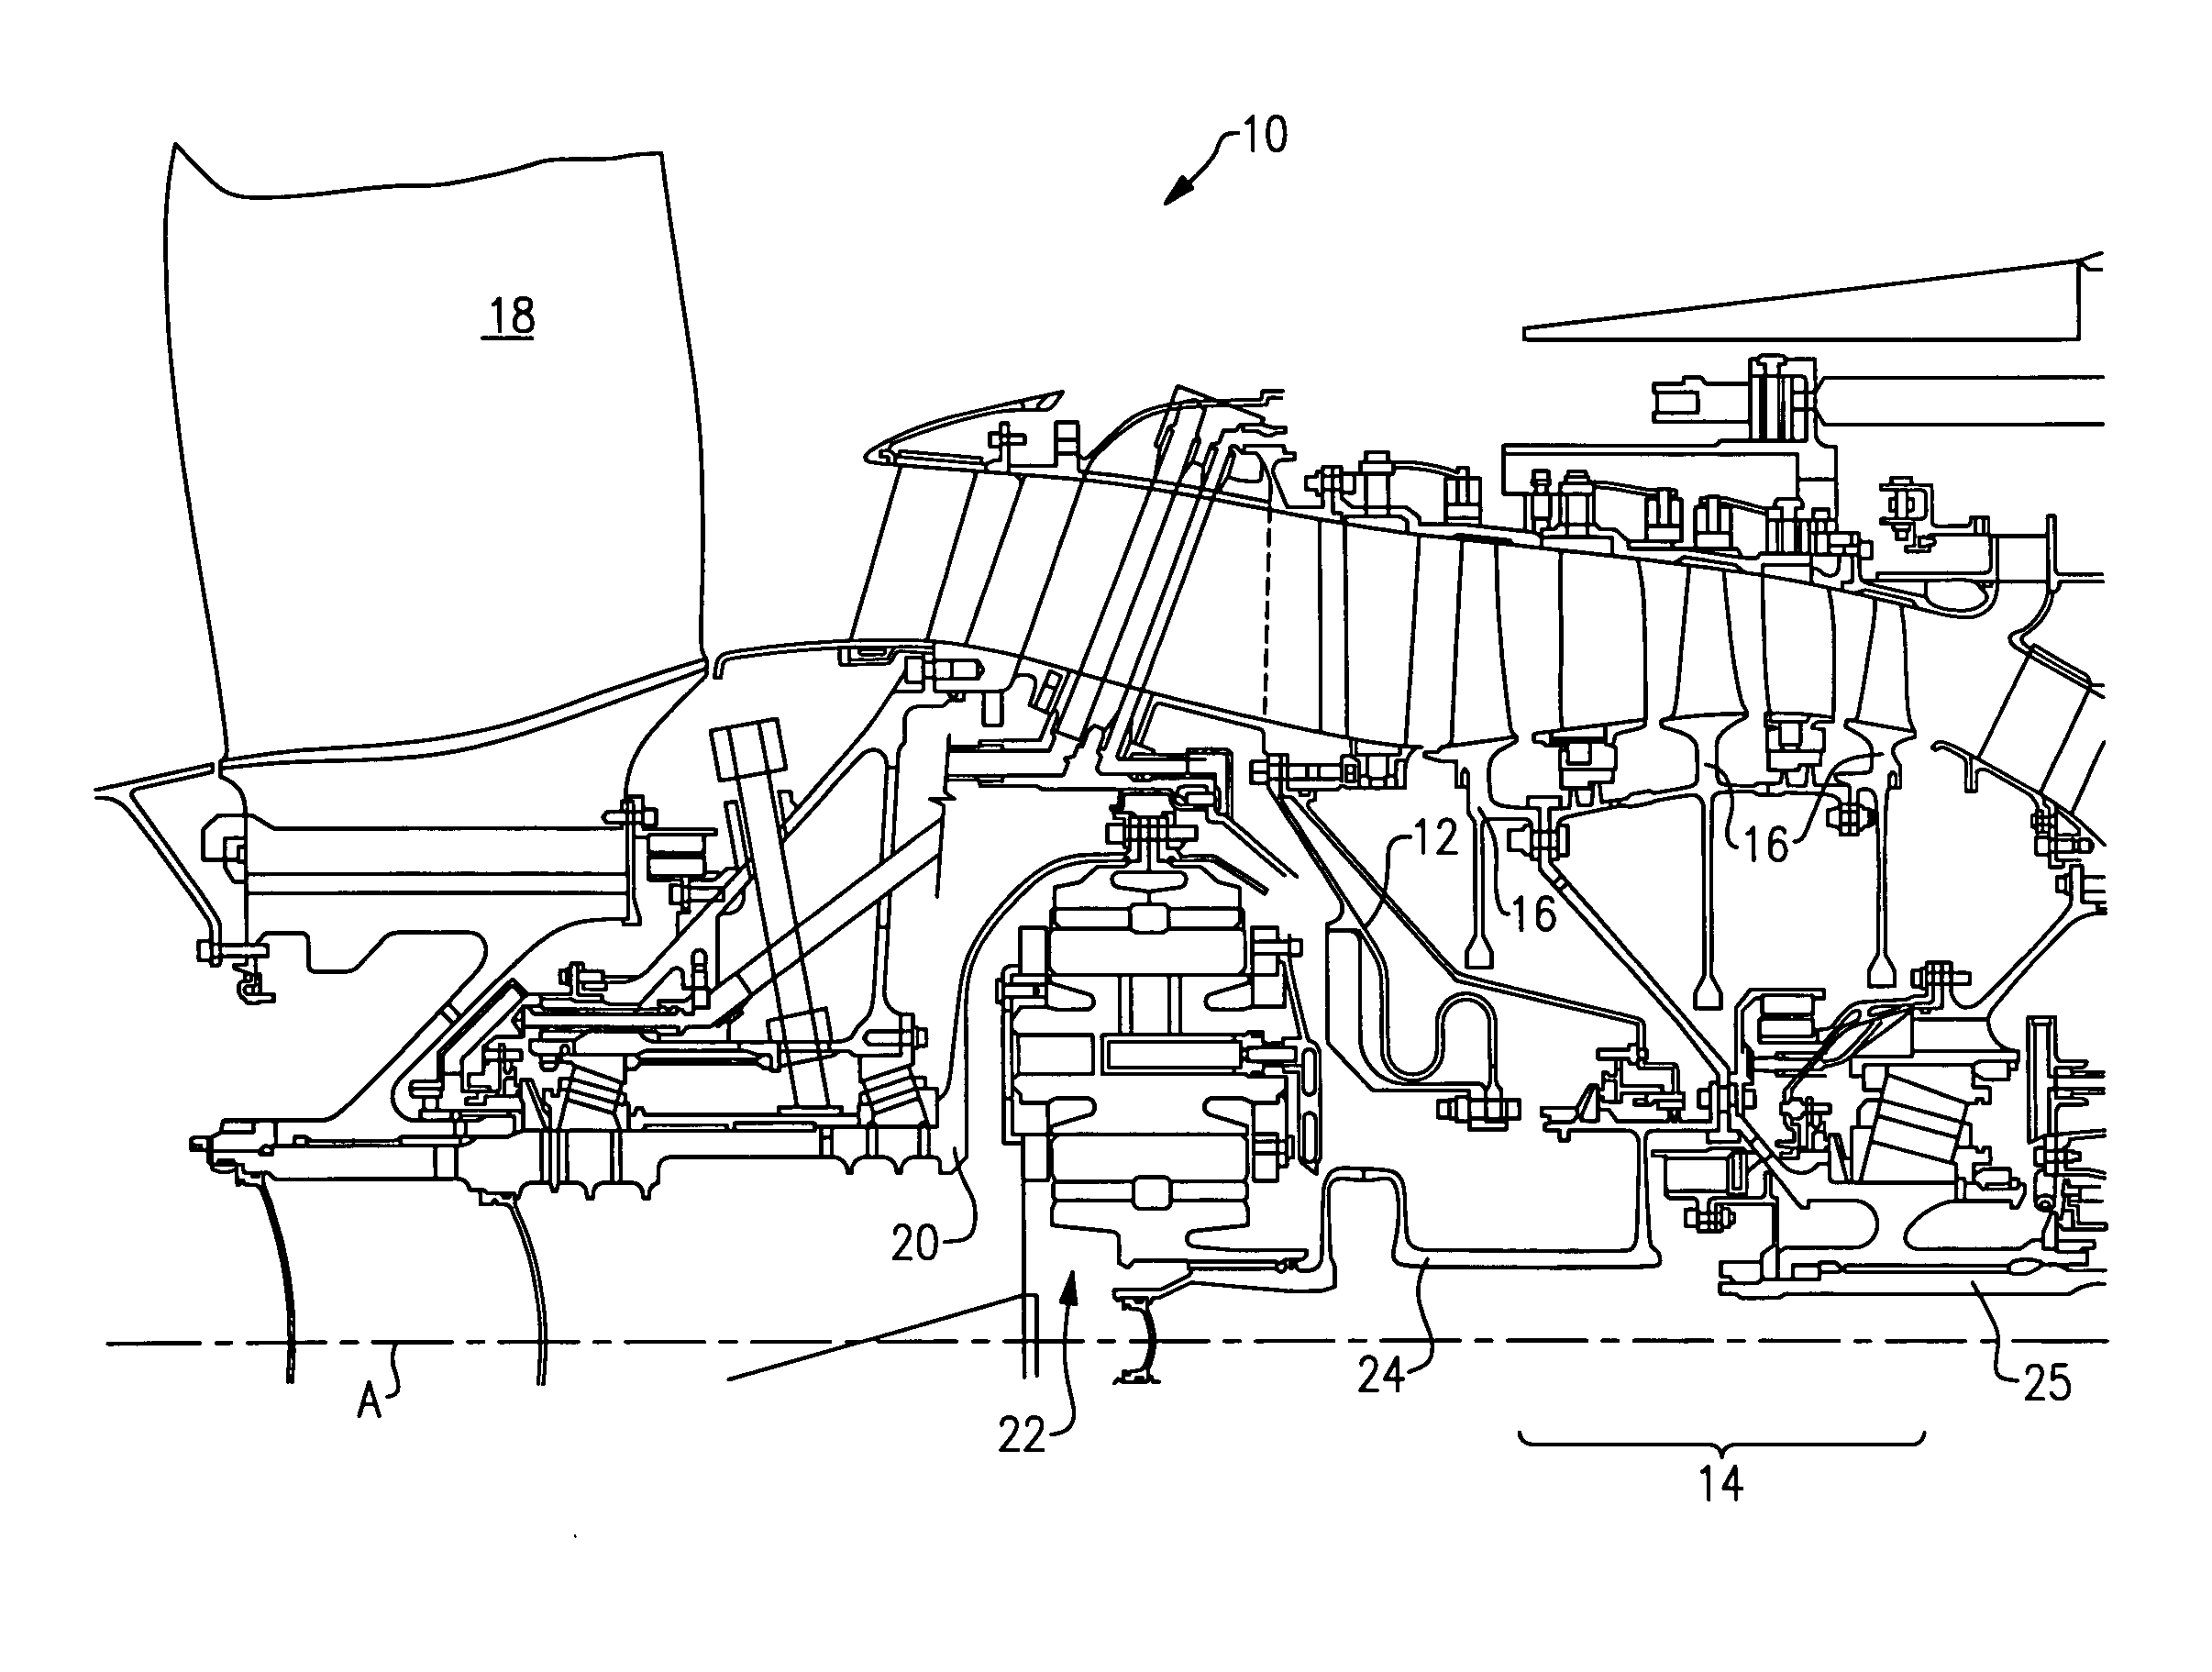 Ring gear mounting arrangement with oil scavenge scheme